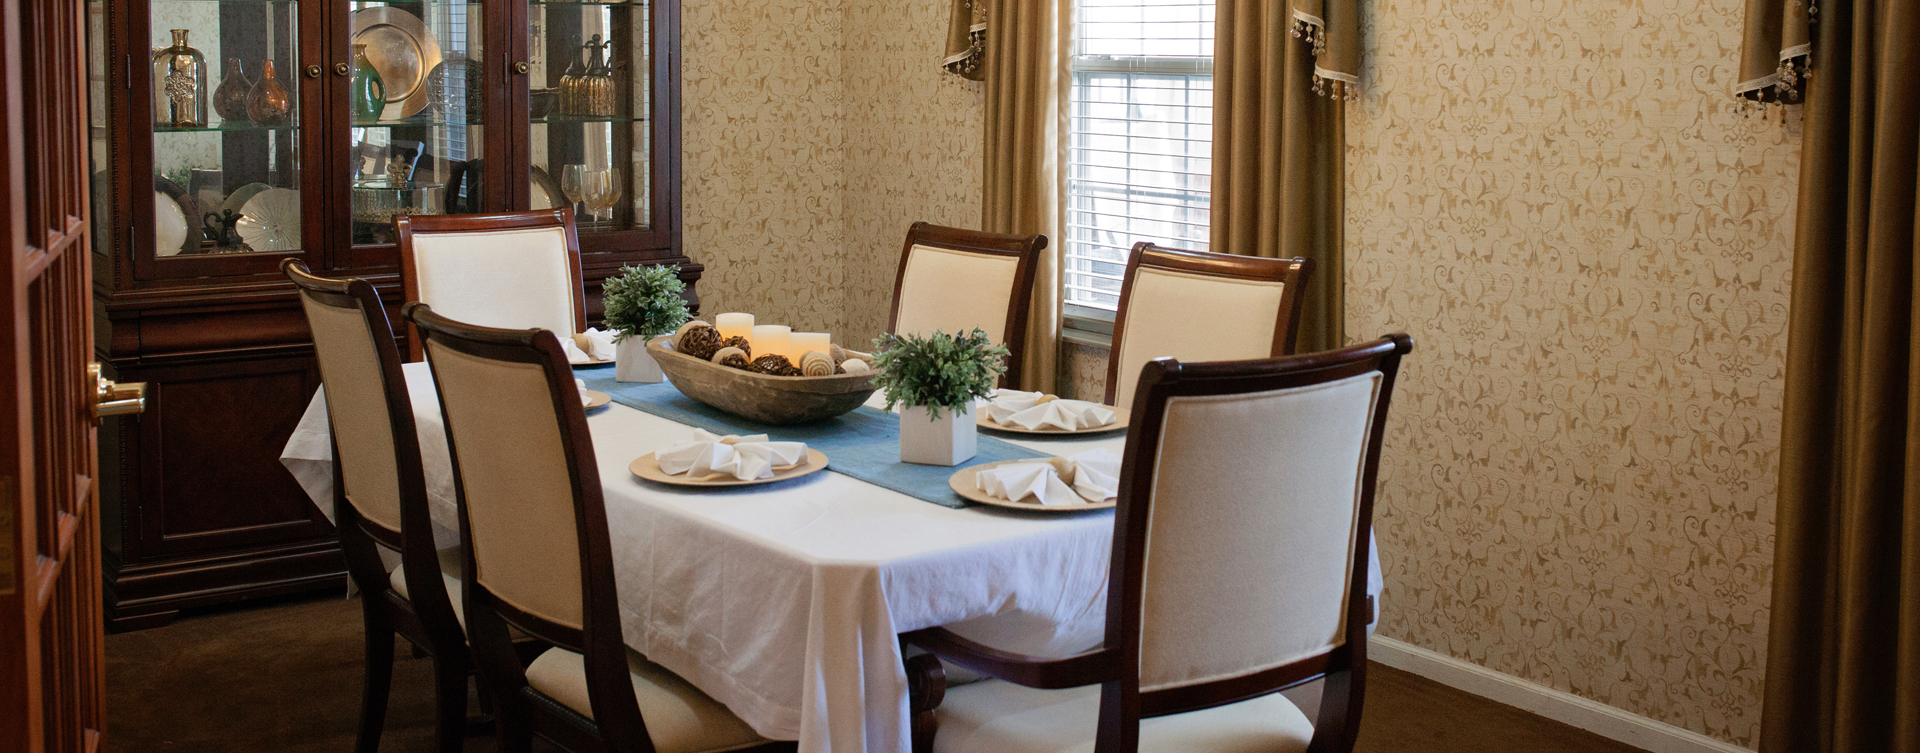 Celebrate special occasions in the private dining room at Bickford of Marion